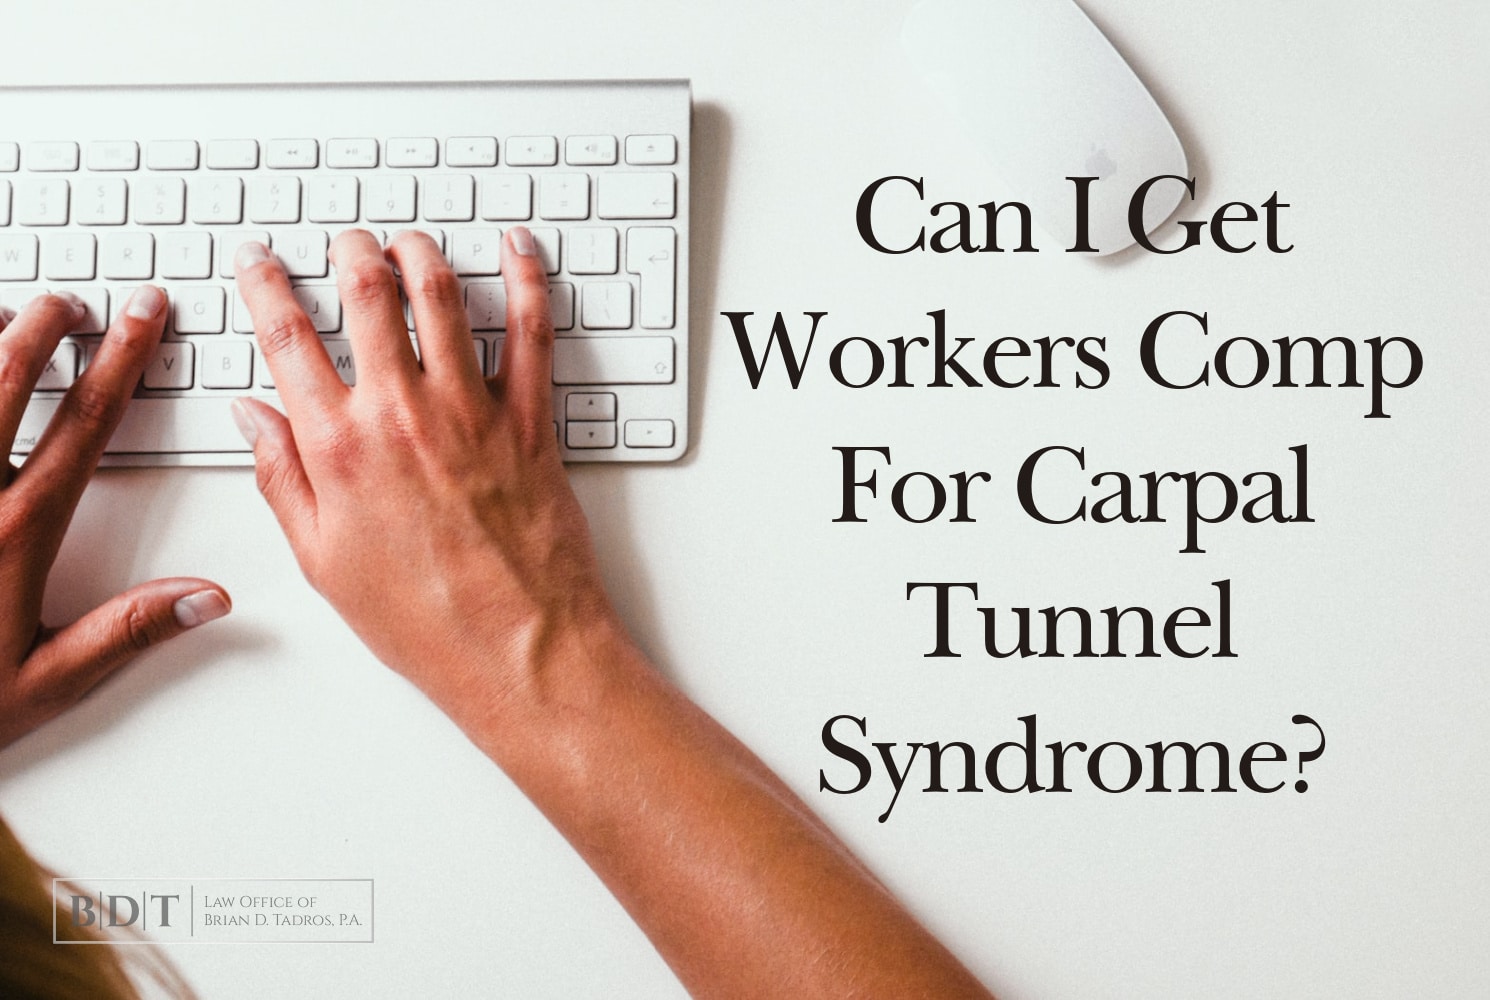 Can I Get Workers Comp For Carpal Tunnel? - BDT Law Firm